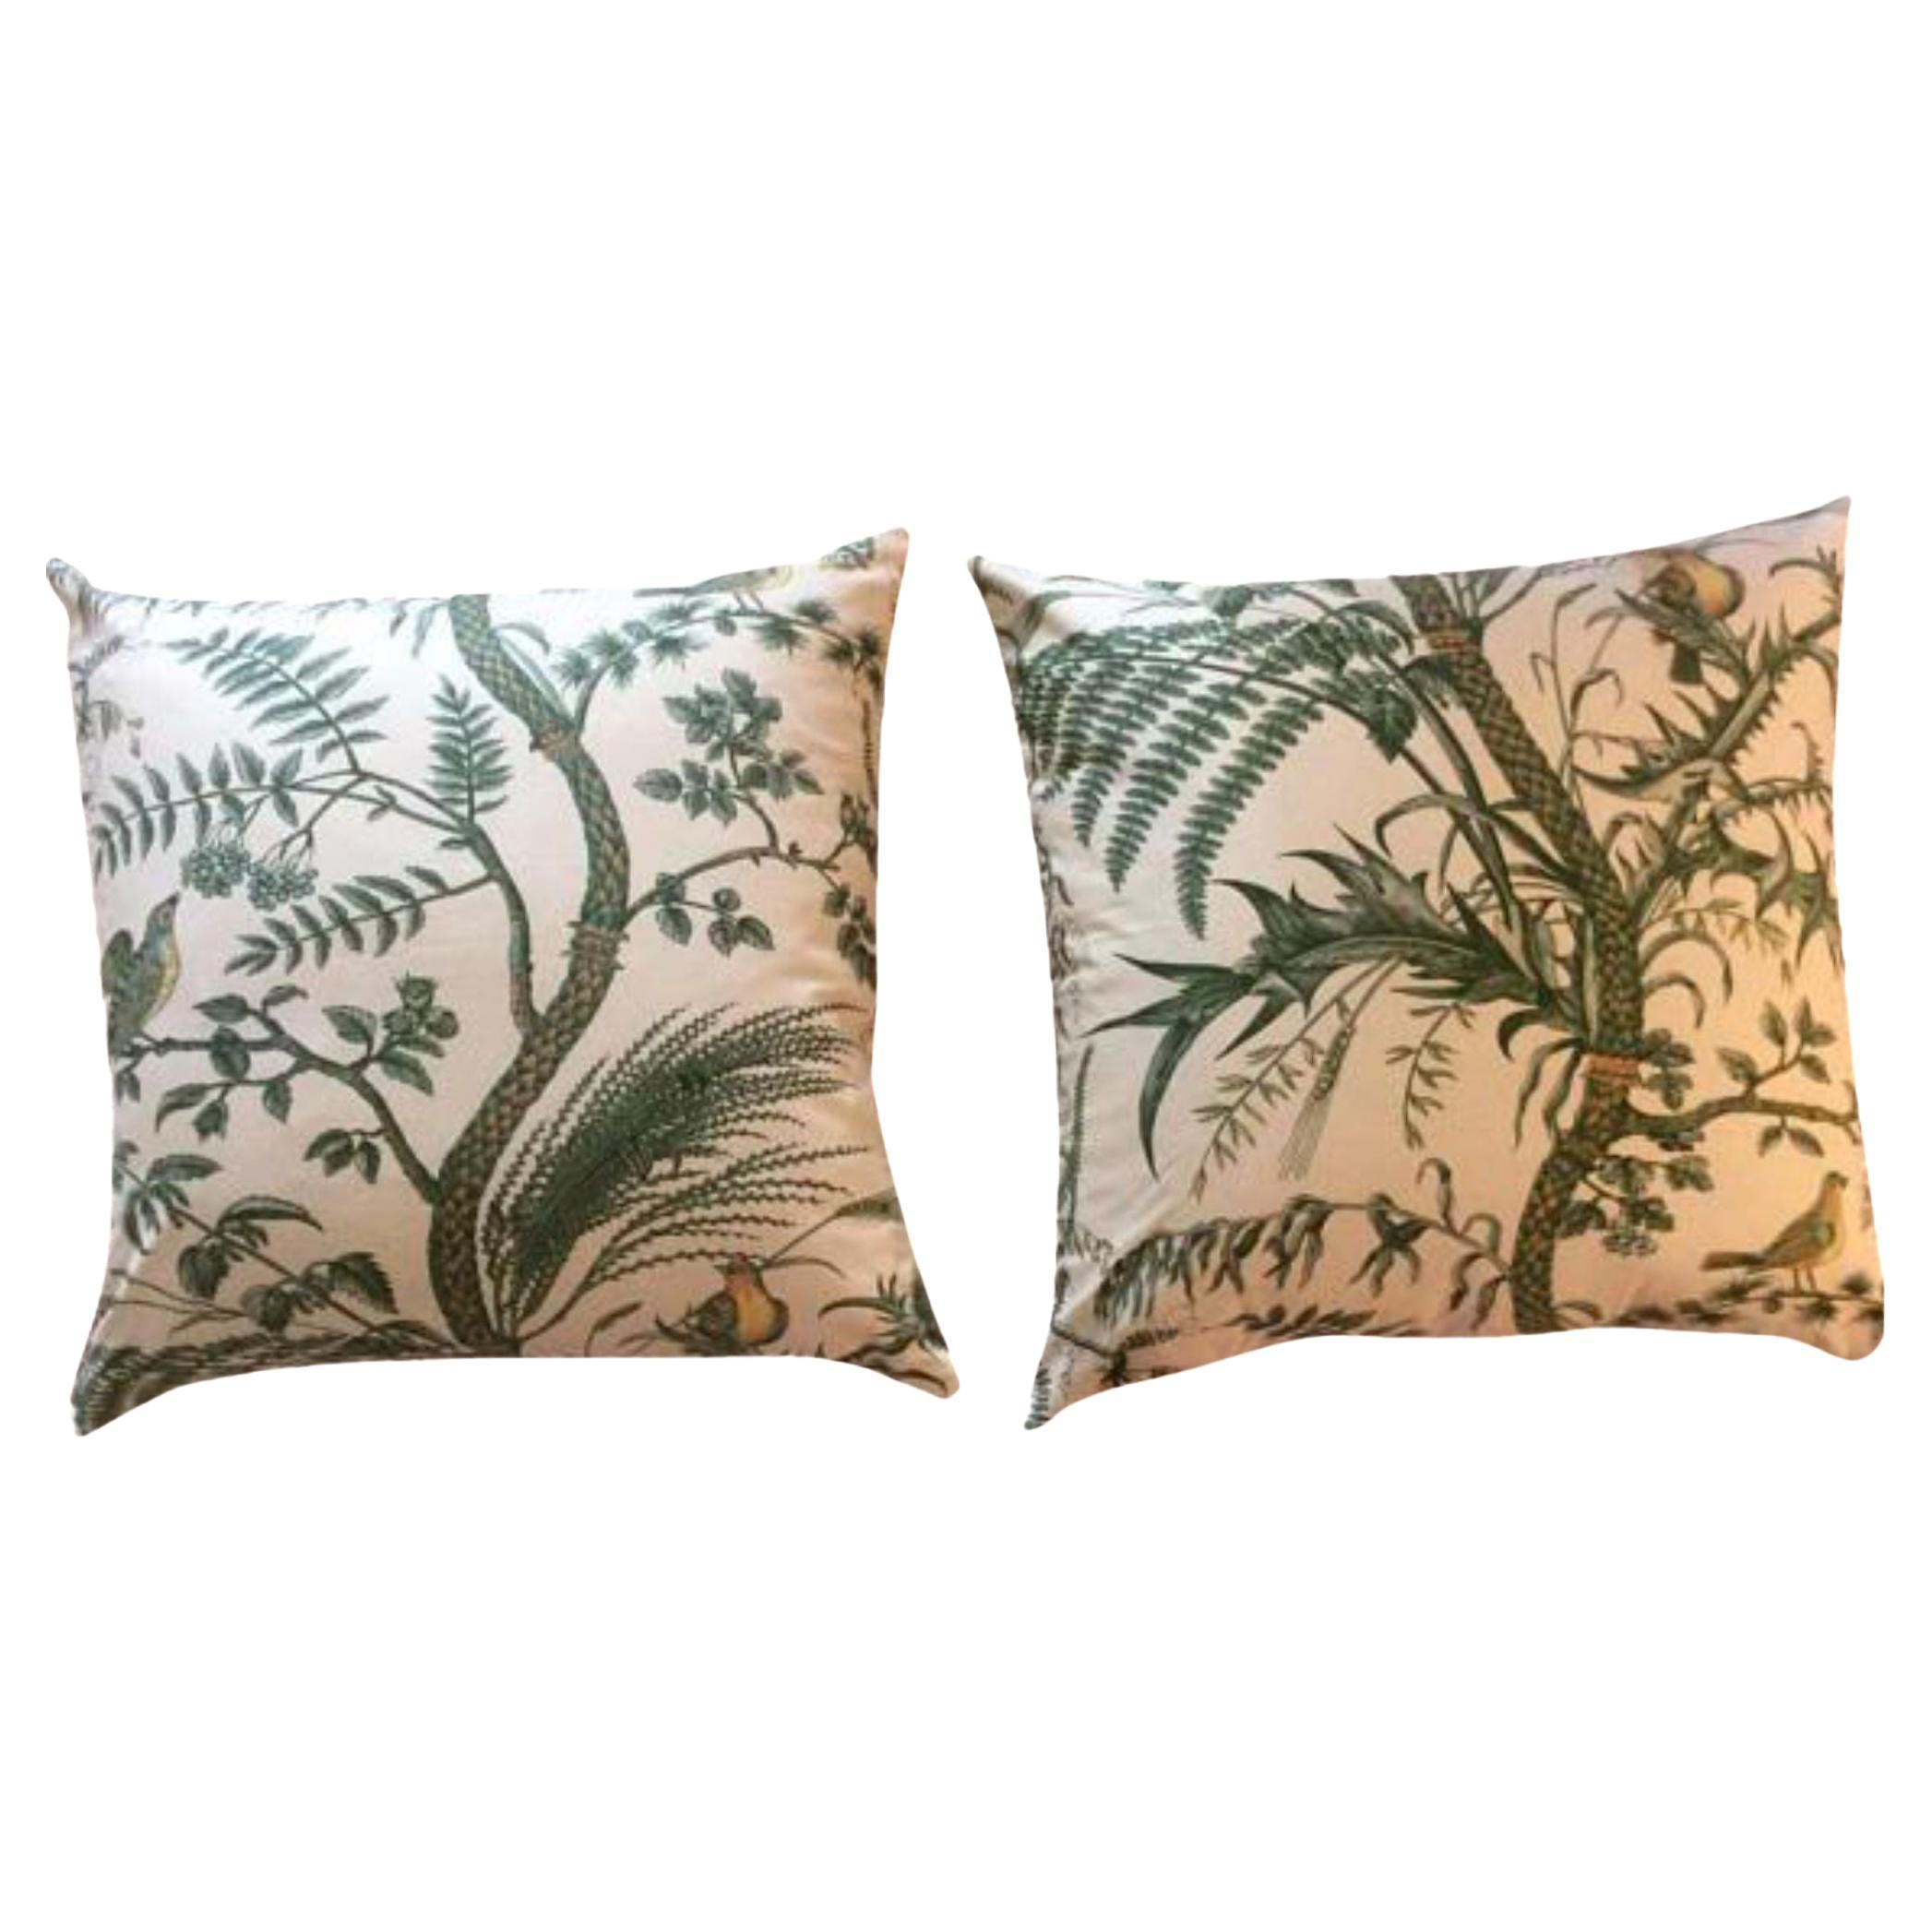 Brunschwig & Fils Bird and Thistle Green Pillow Covers - a Pair For Sale